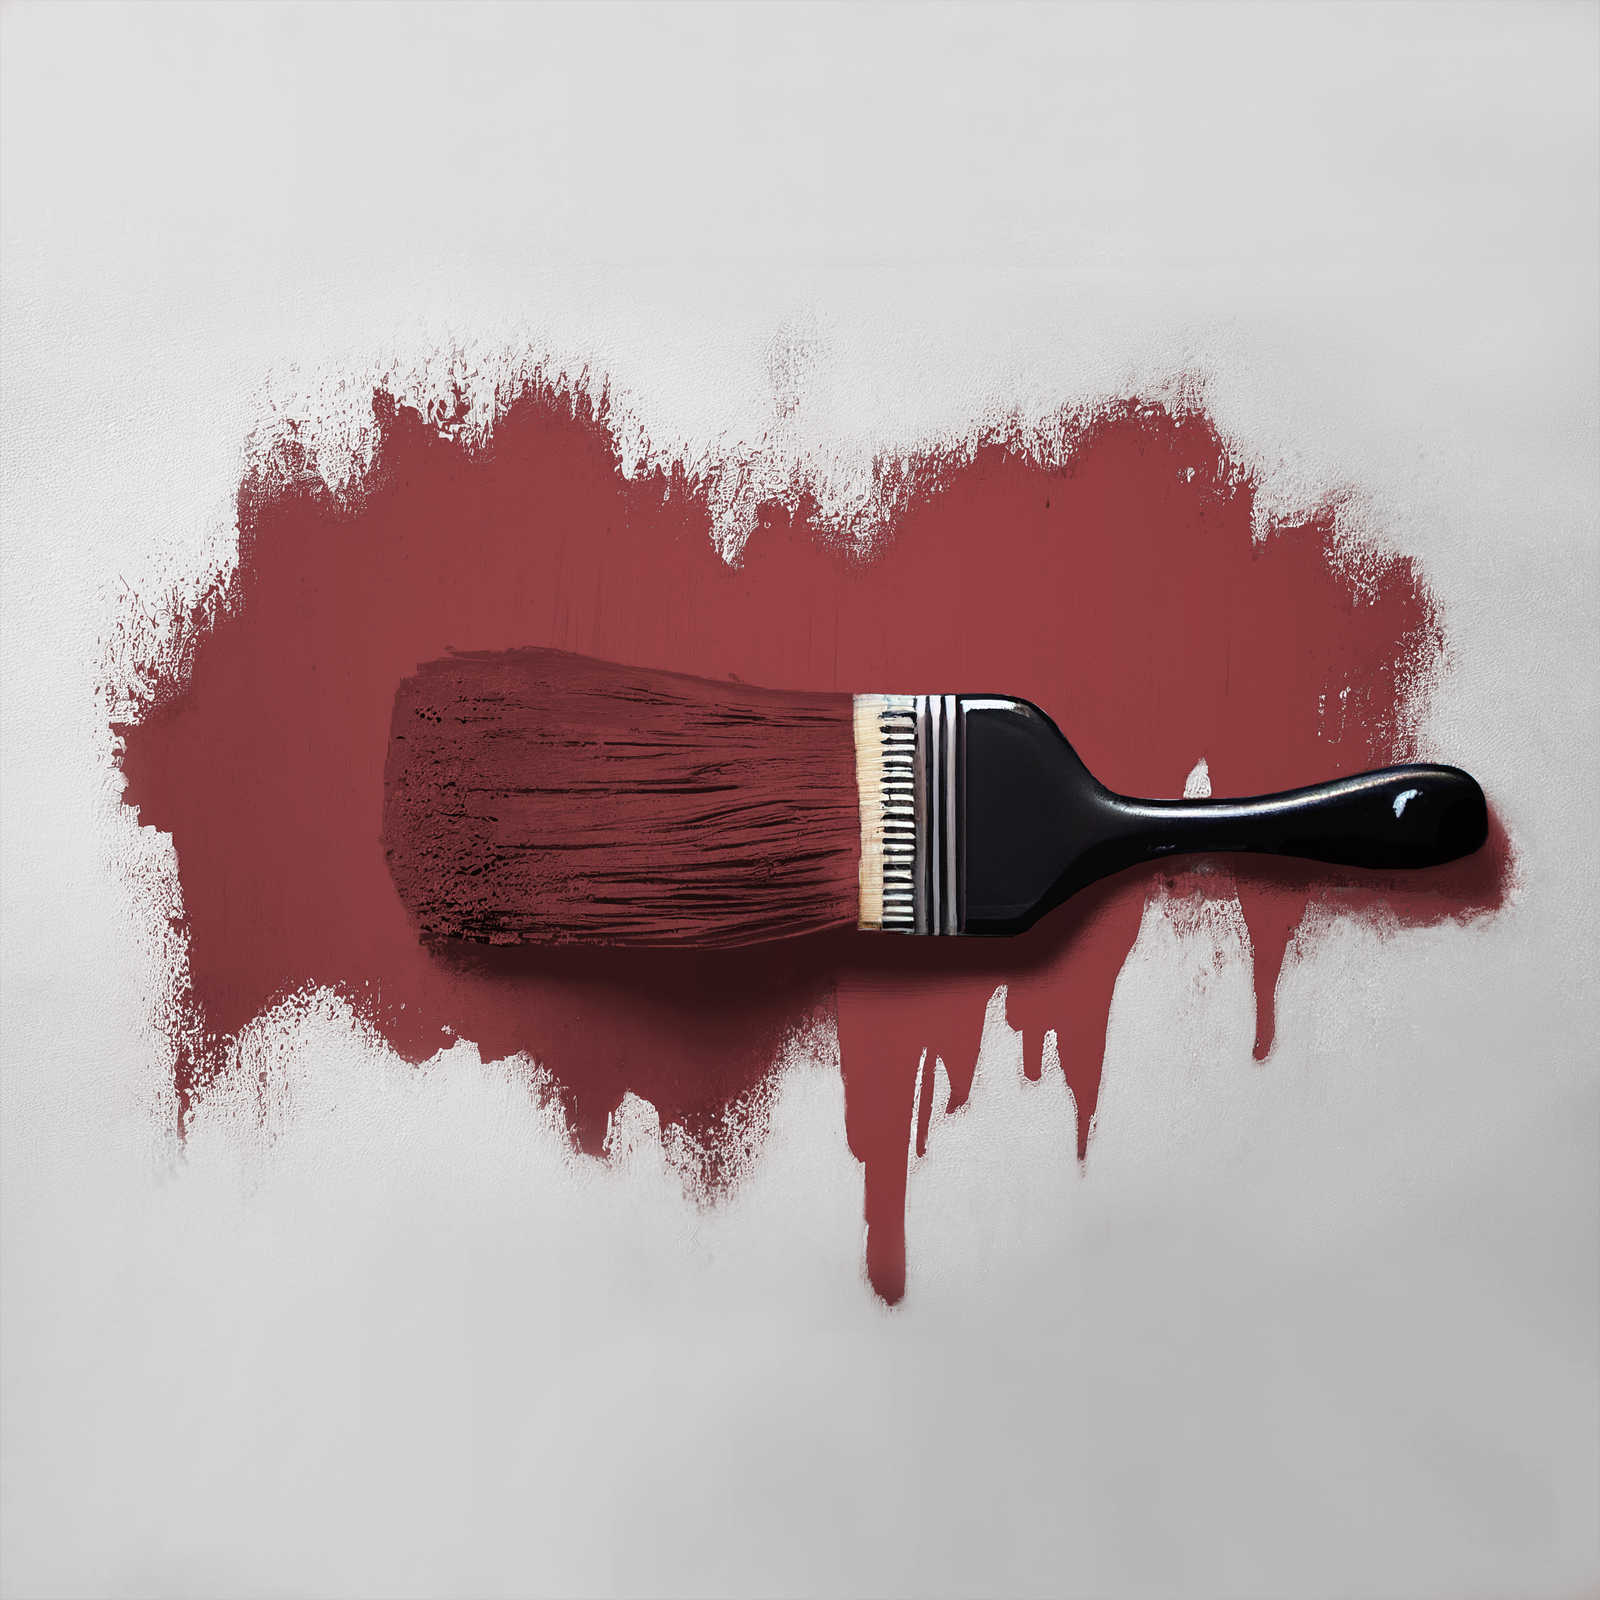             Wall Paint TCK7006 »Perky Pomegranate« in passionate dark red – 2.5 litre
        